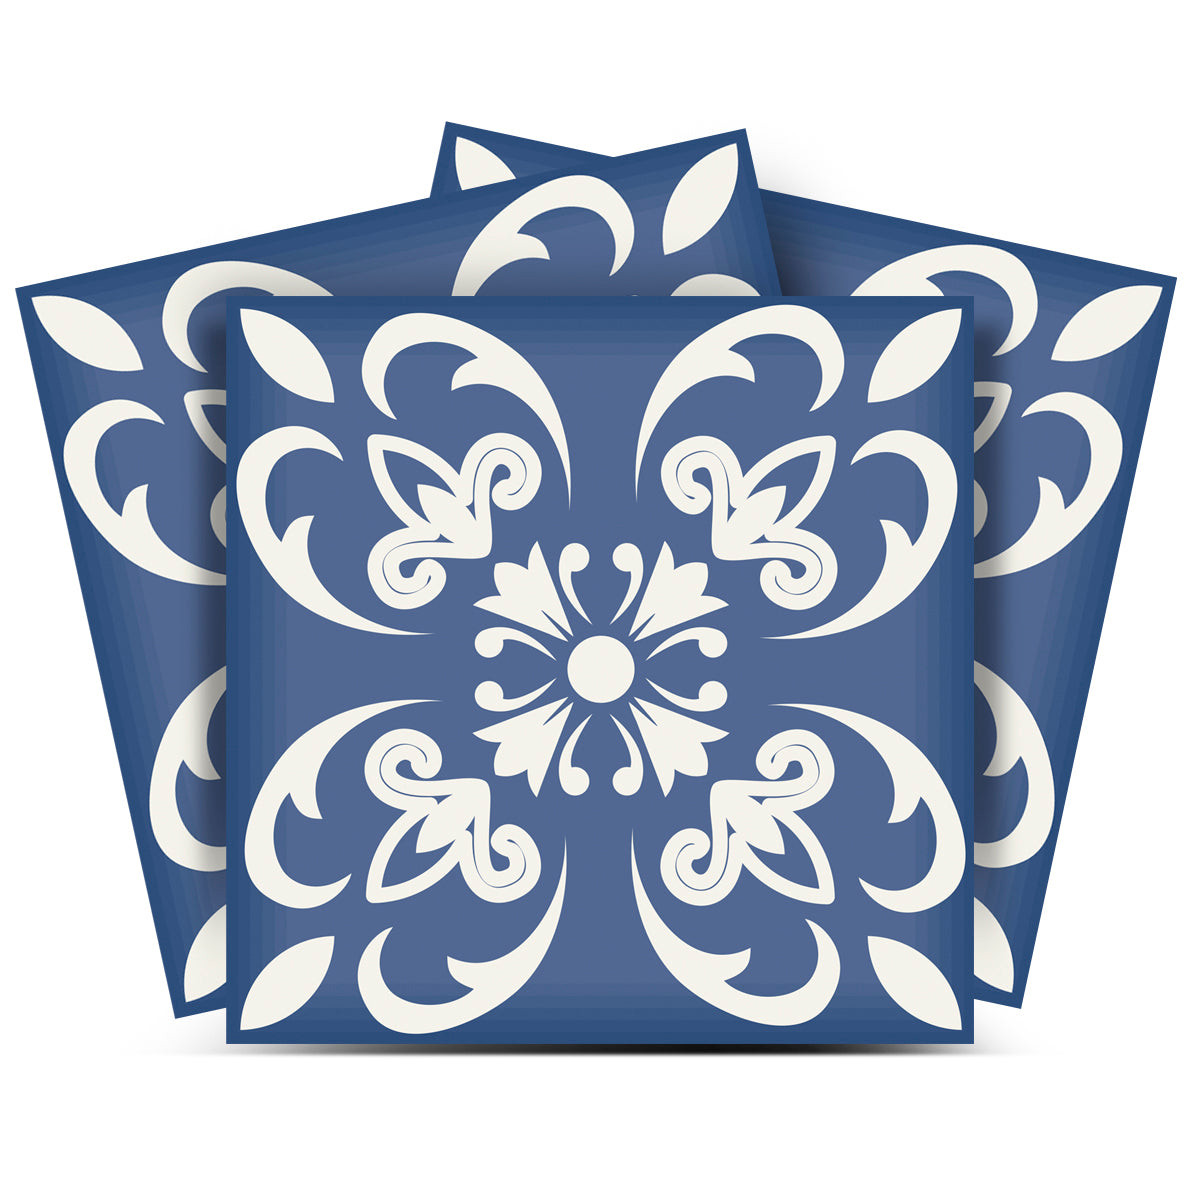 6" X 6" Wedgwood Blue And White  Peel And Stick Removable Tiles-390890-1